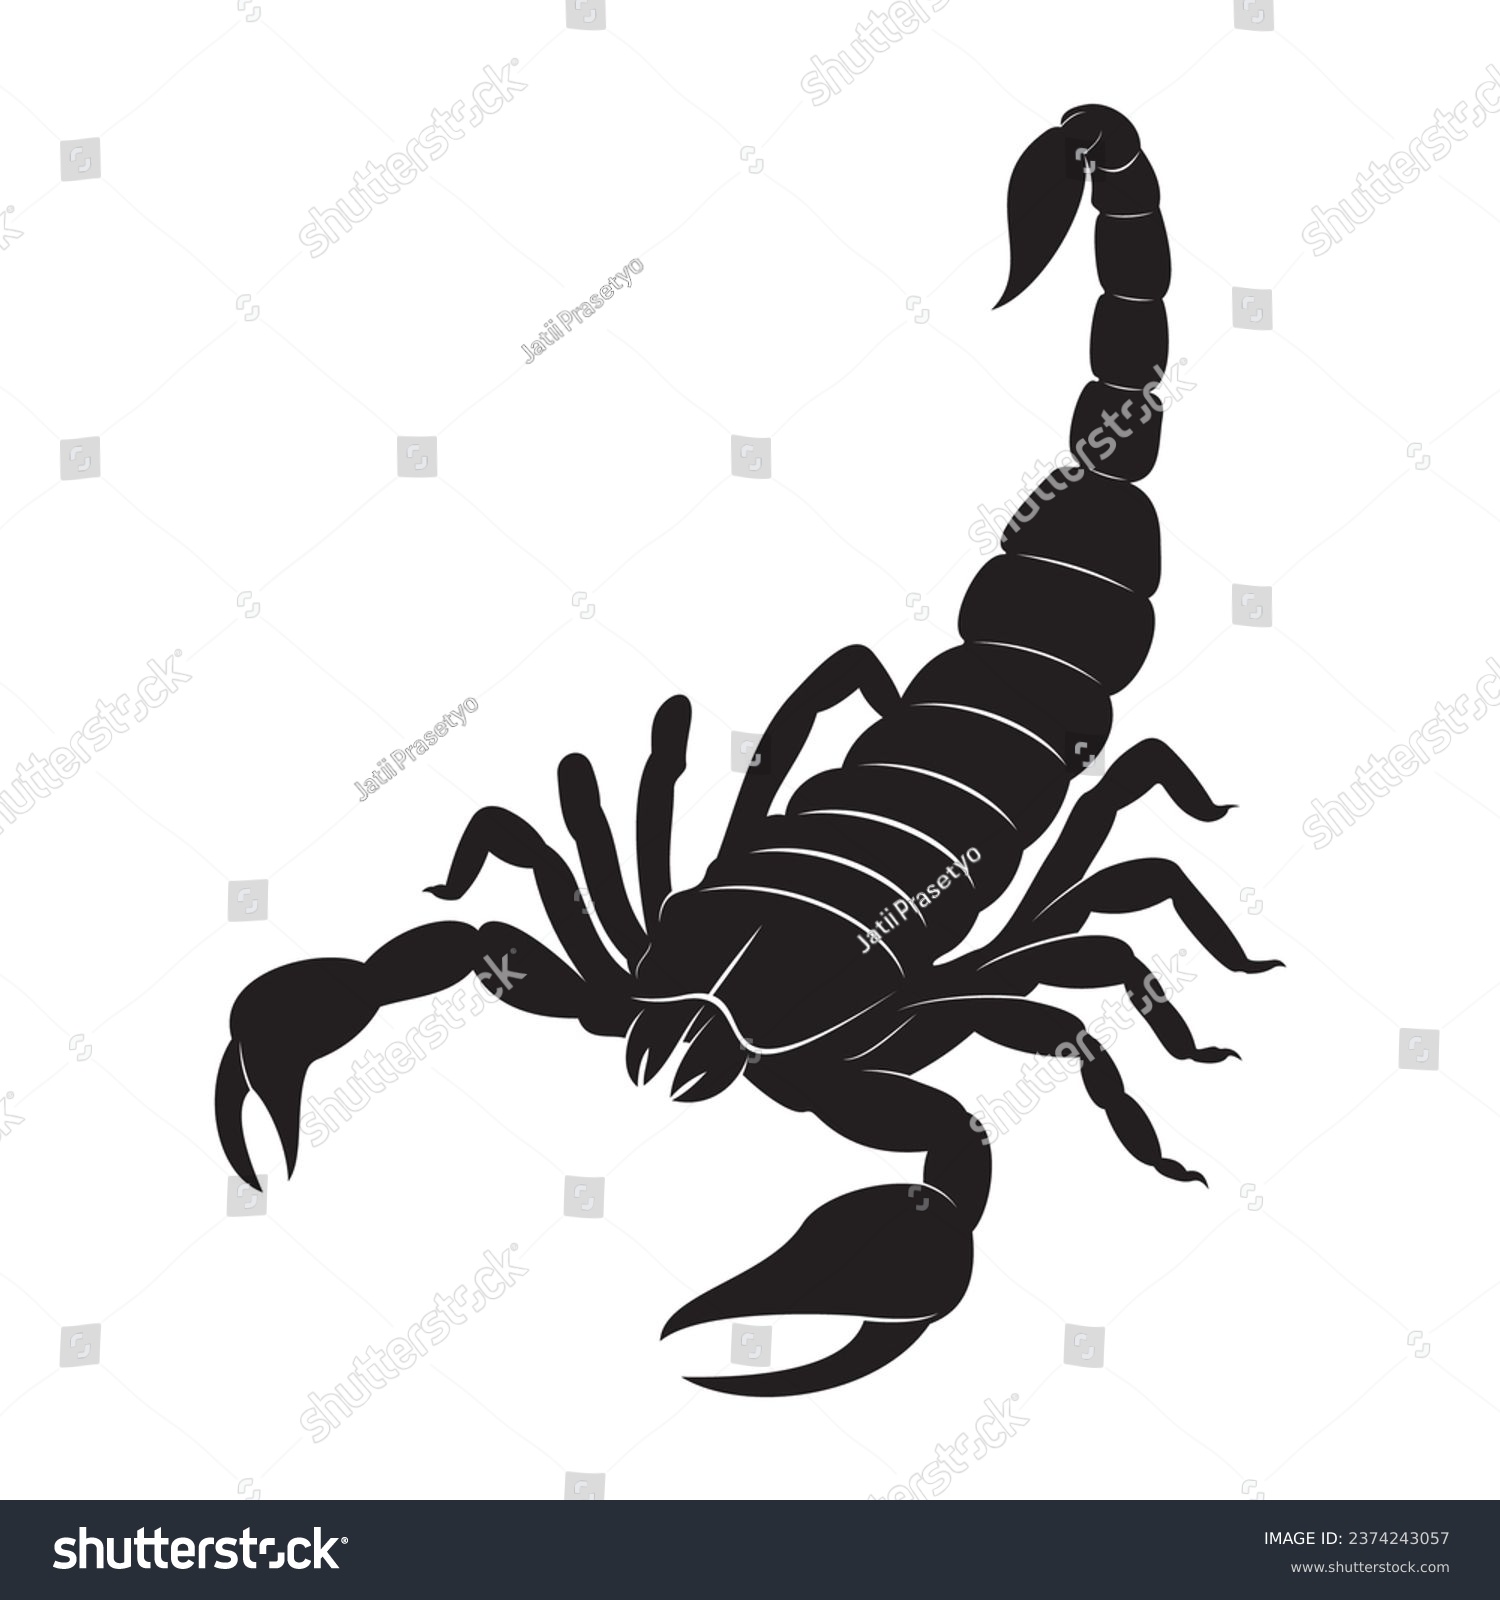 SVG of Scorpion Silhouette on white background svg